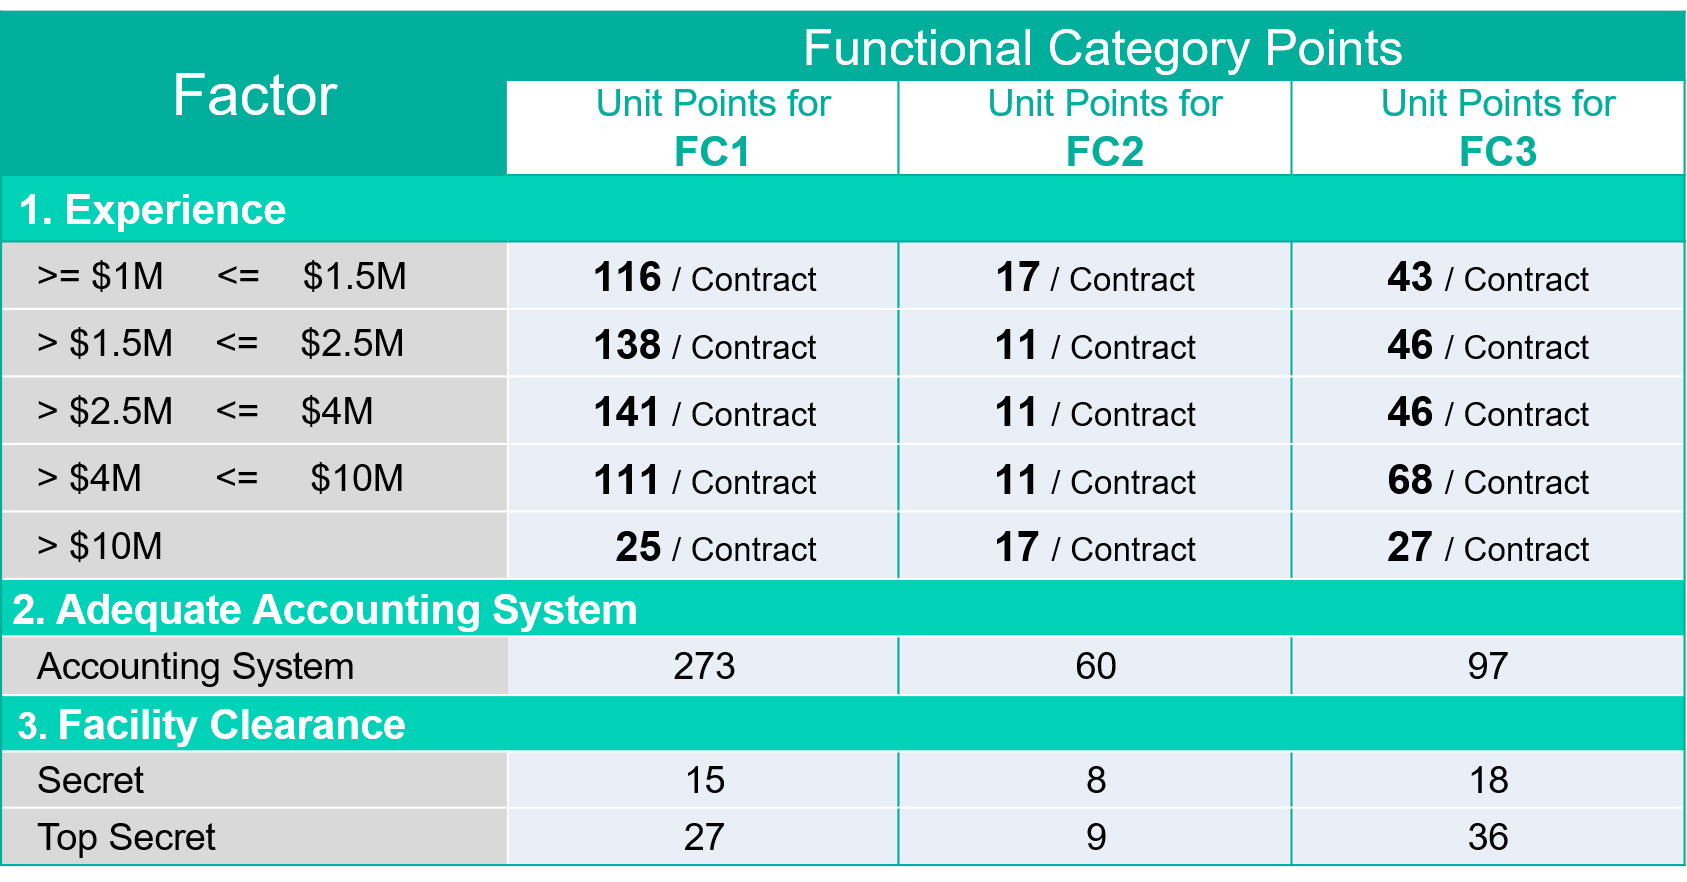 DHS PACTS III Functional Category Points